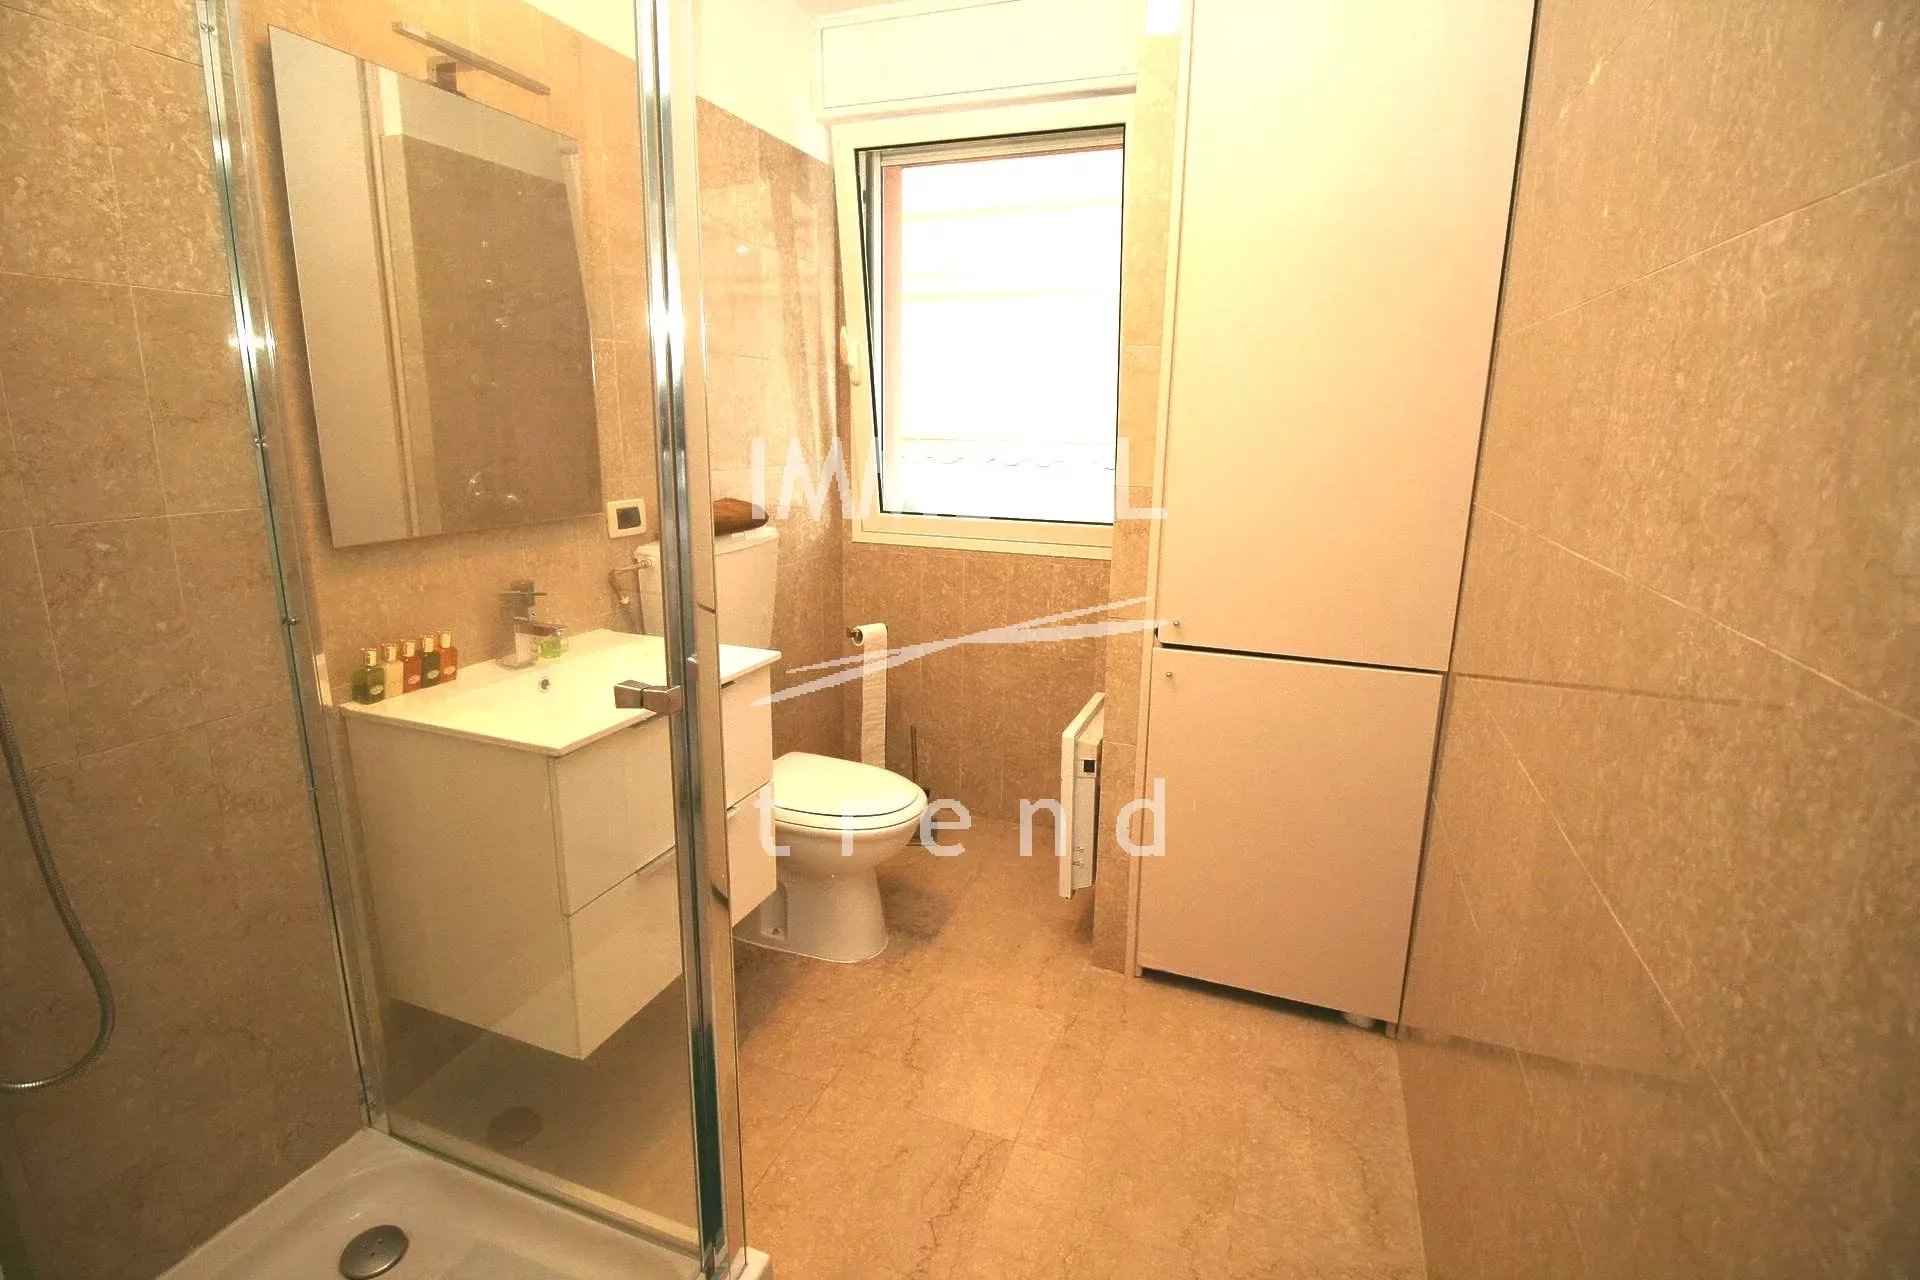 REAL ESTATE BEAUSOLEIL - MONTECARLO VISTA - TWO BEDROOM APARTMENT FOR SALE WITH TERRACE OF 90 sqm AND PRIVATE PARKING SPACE